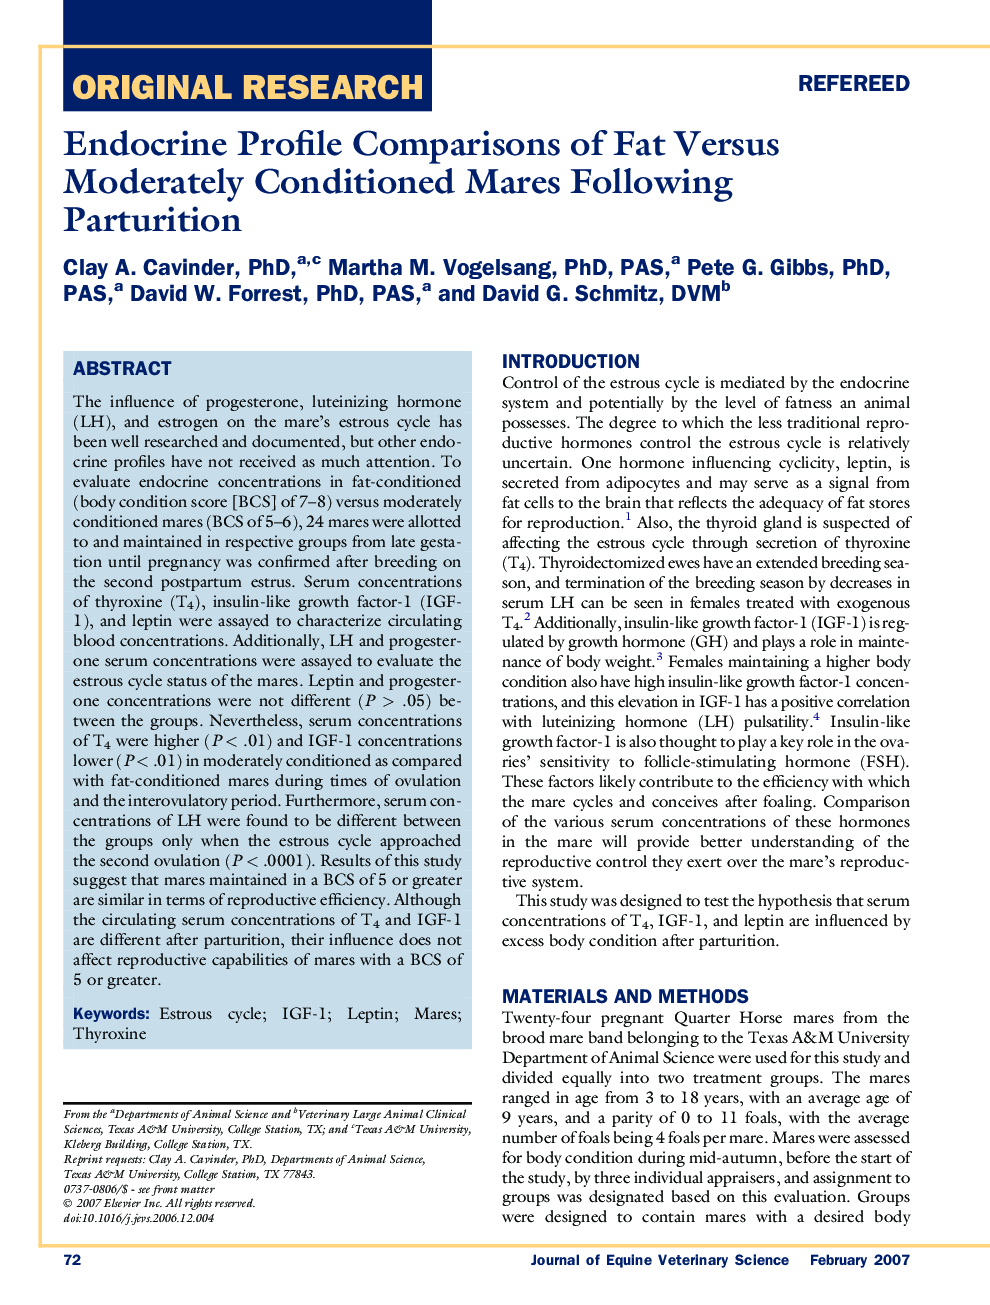 Endocrine Profile Comparisons of Fat Versus Moderately Conditioned Mares Following Parturition 